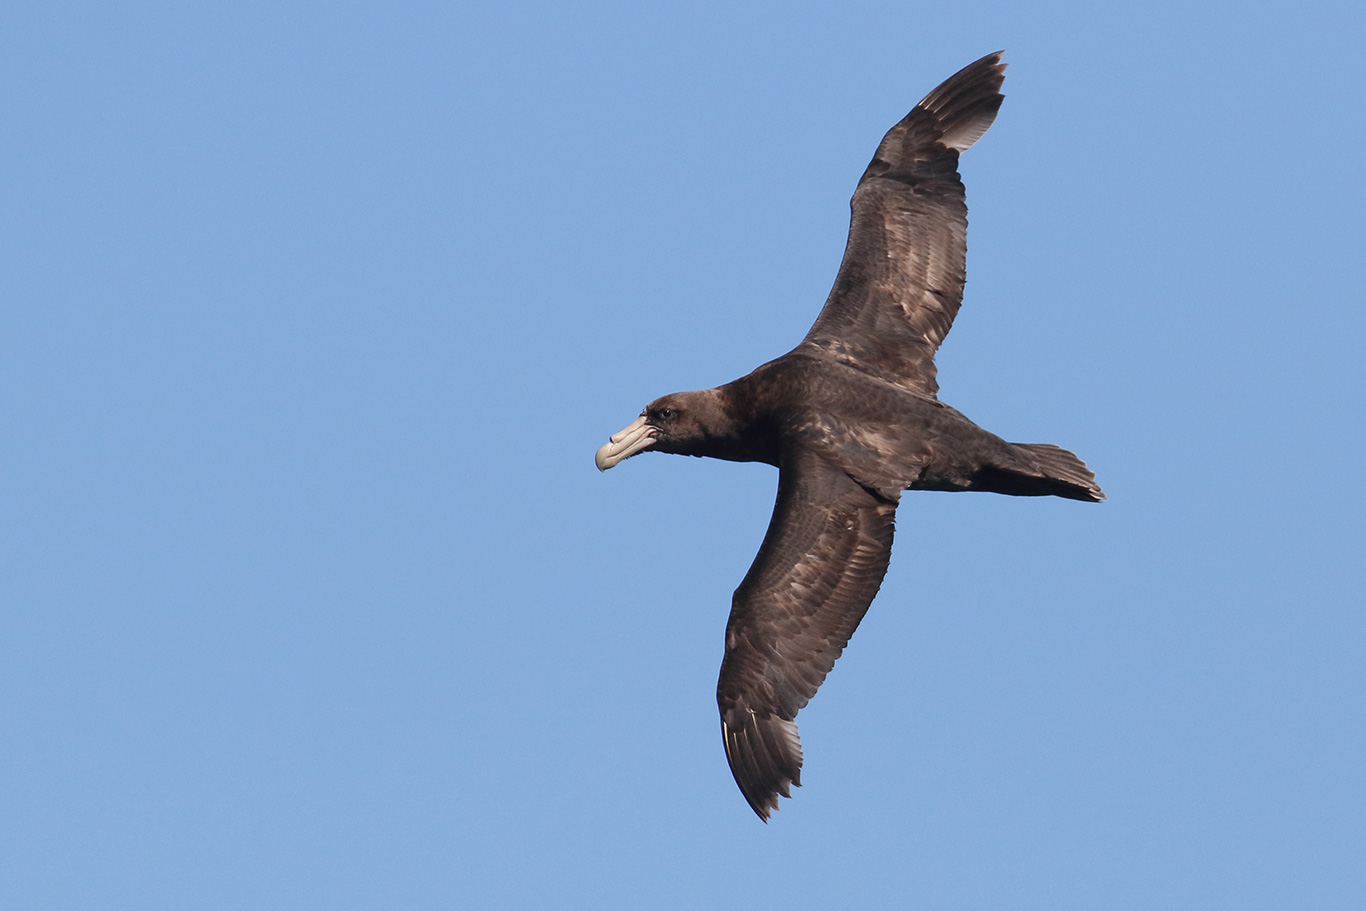 Southern Giant Petrel, At sea, c. 600km east of Argentina, north of The Falklands, South Atlantic Ocean.